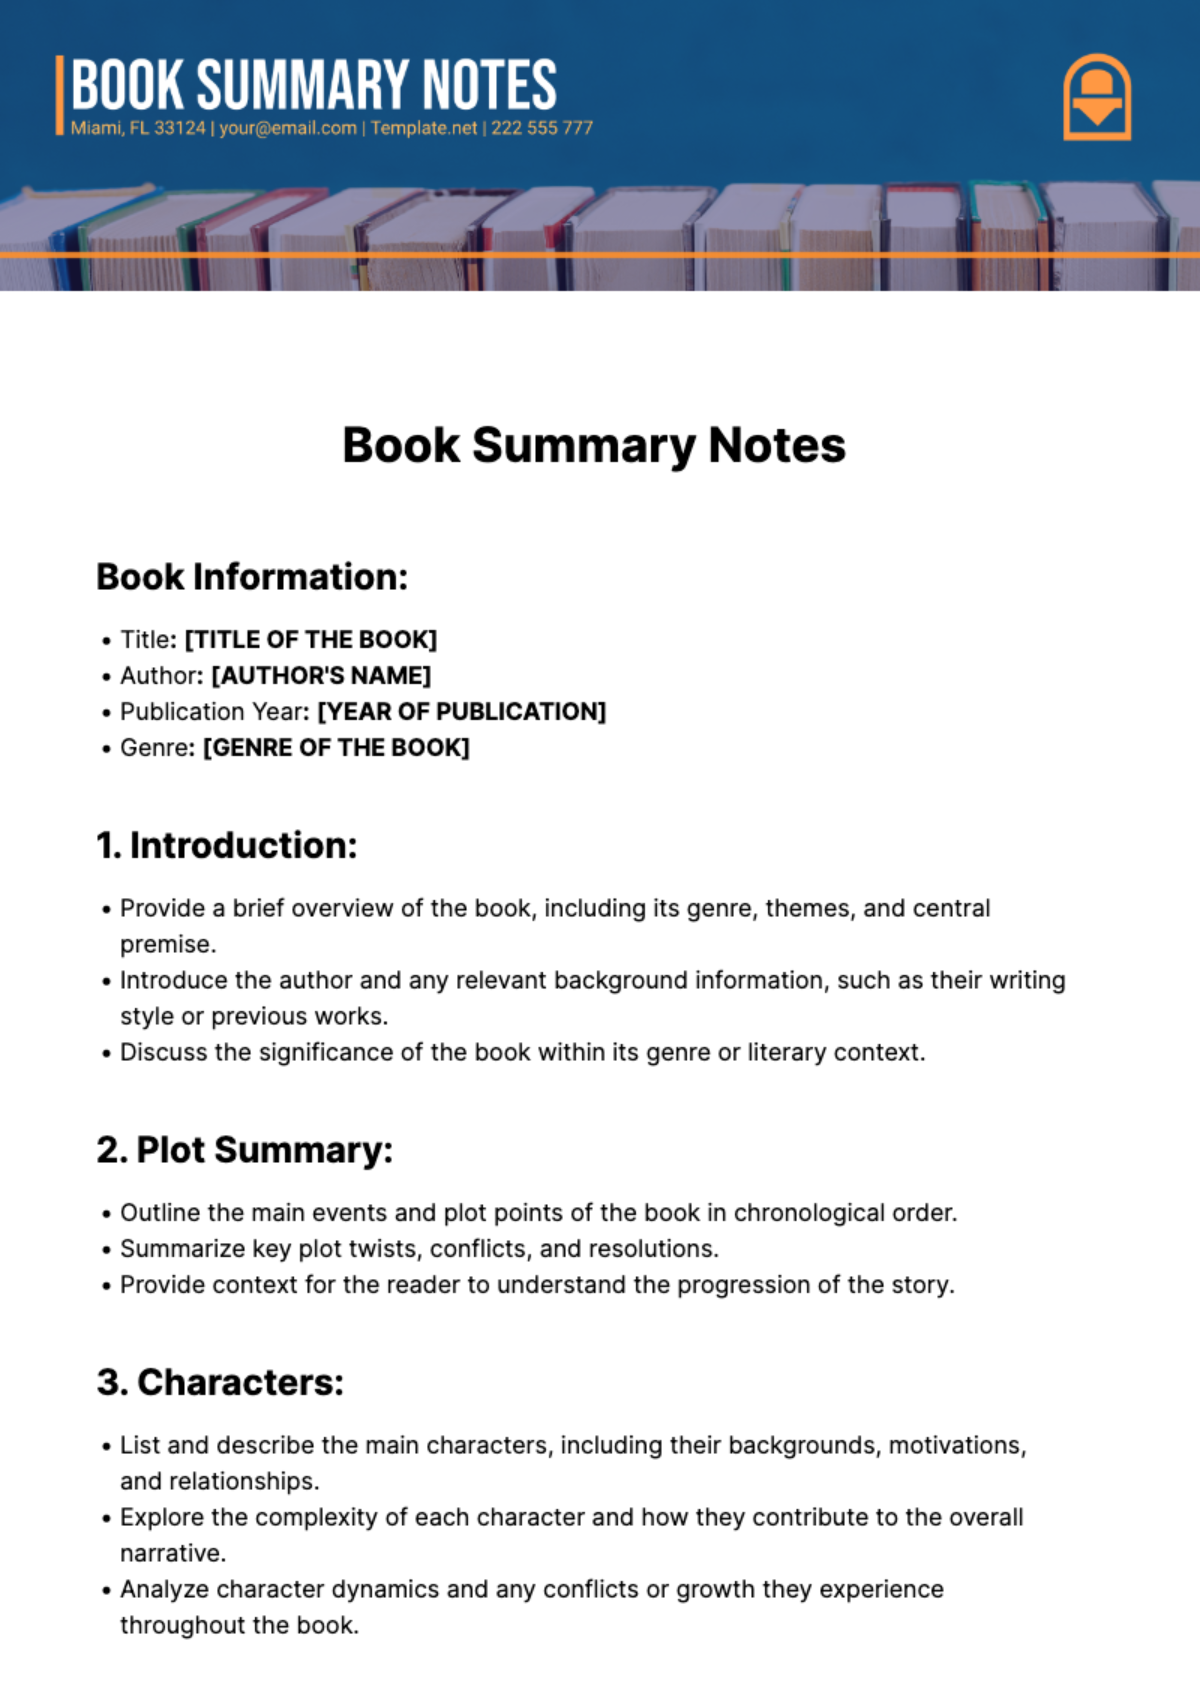 Book Summary Notes Template